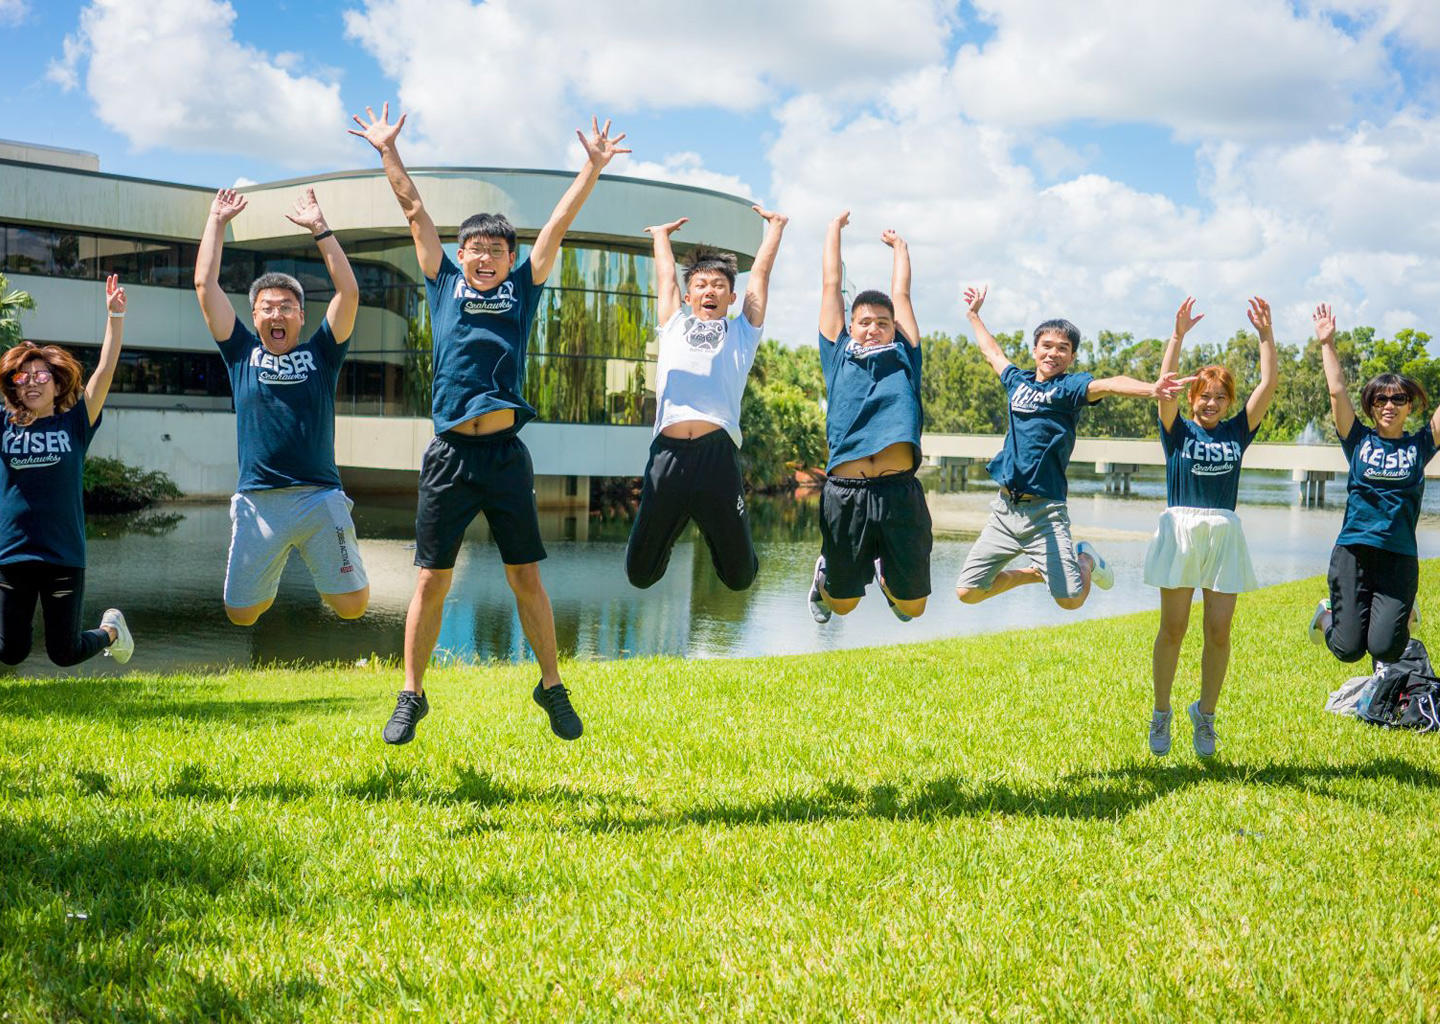 Keiser University: Fees, Reviews, Rankings, Courses & Contact info